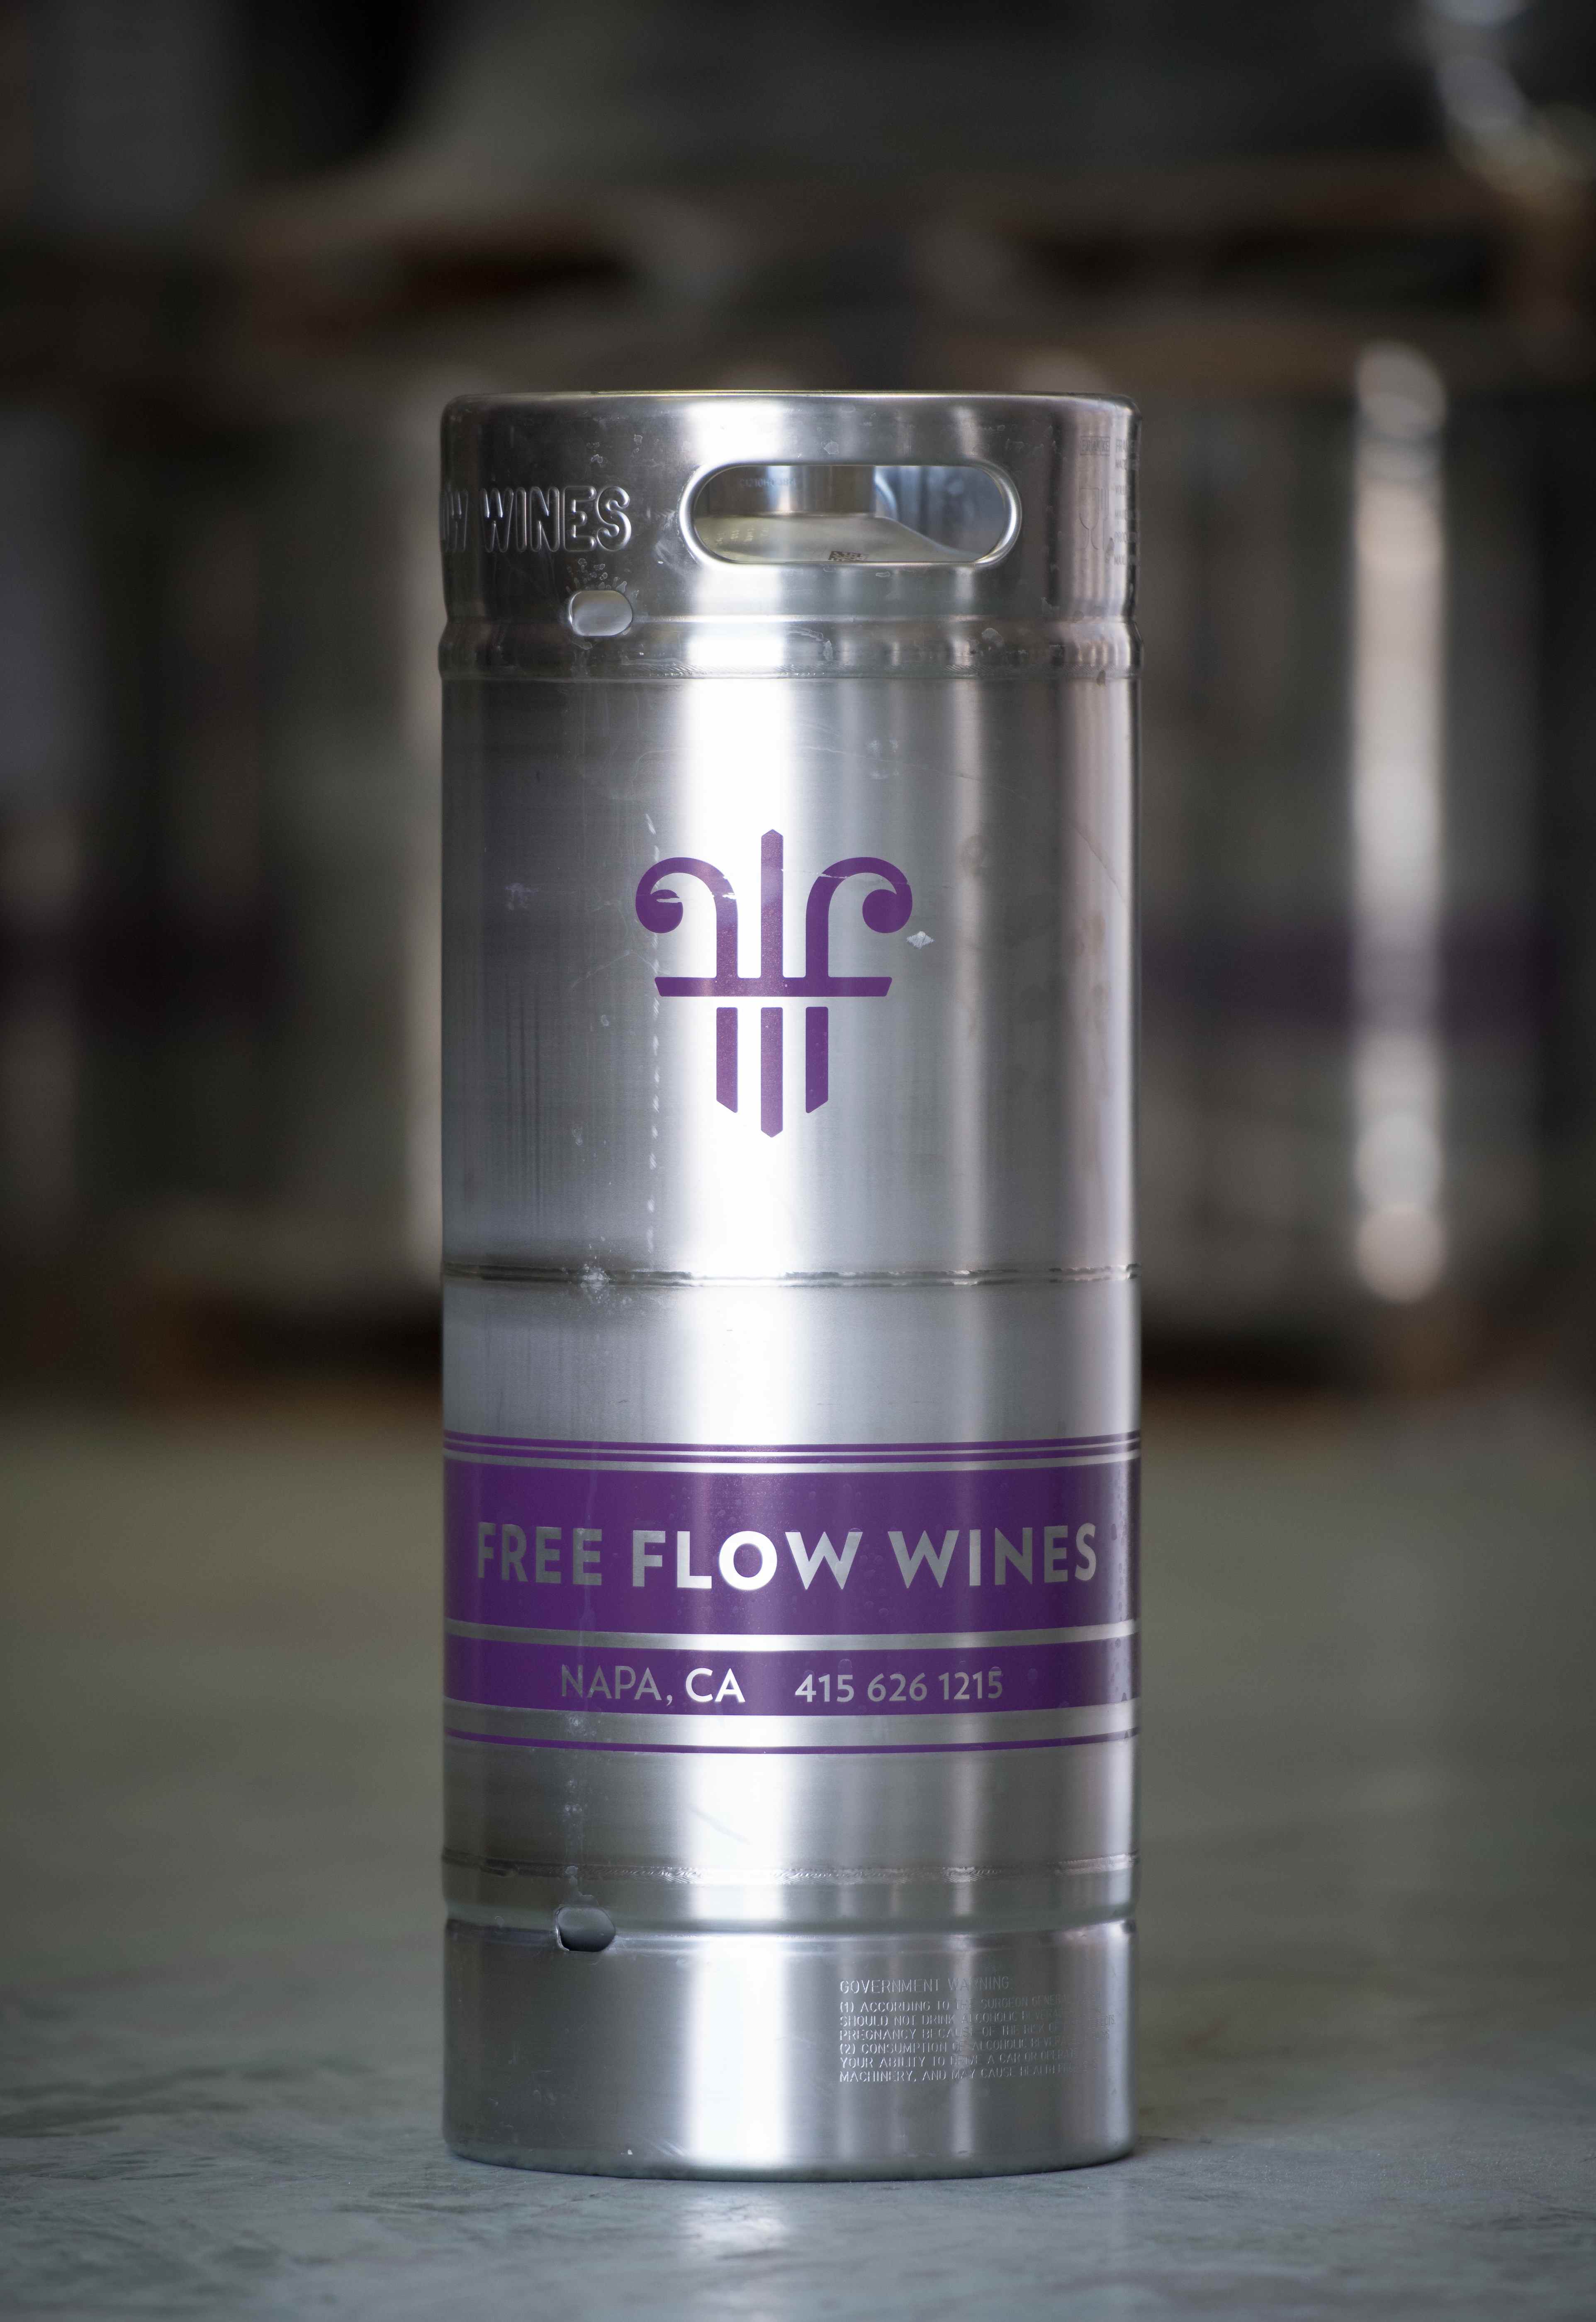 Over the 20-year life of a Free Flow stainless steel keg, the carbon footprint of the same amount of wine poured from bottles is reduced by 96%.